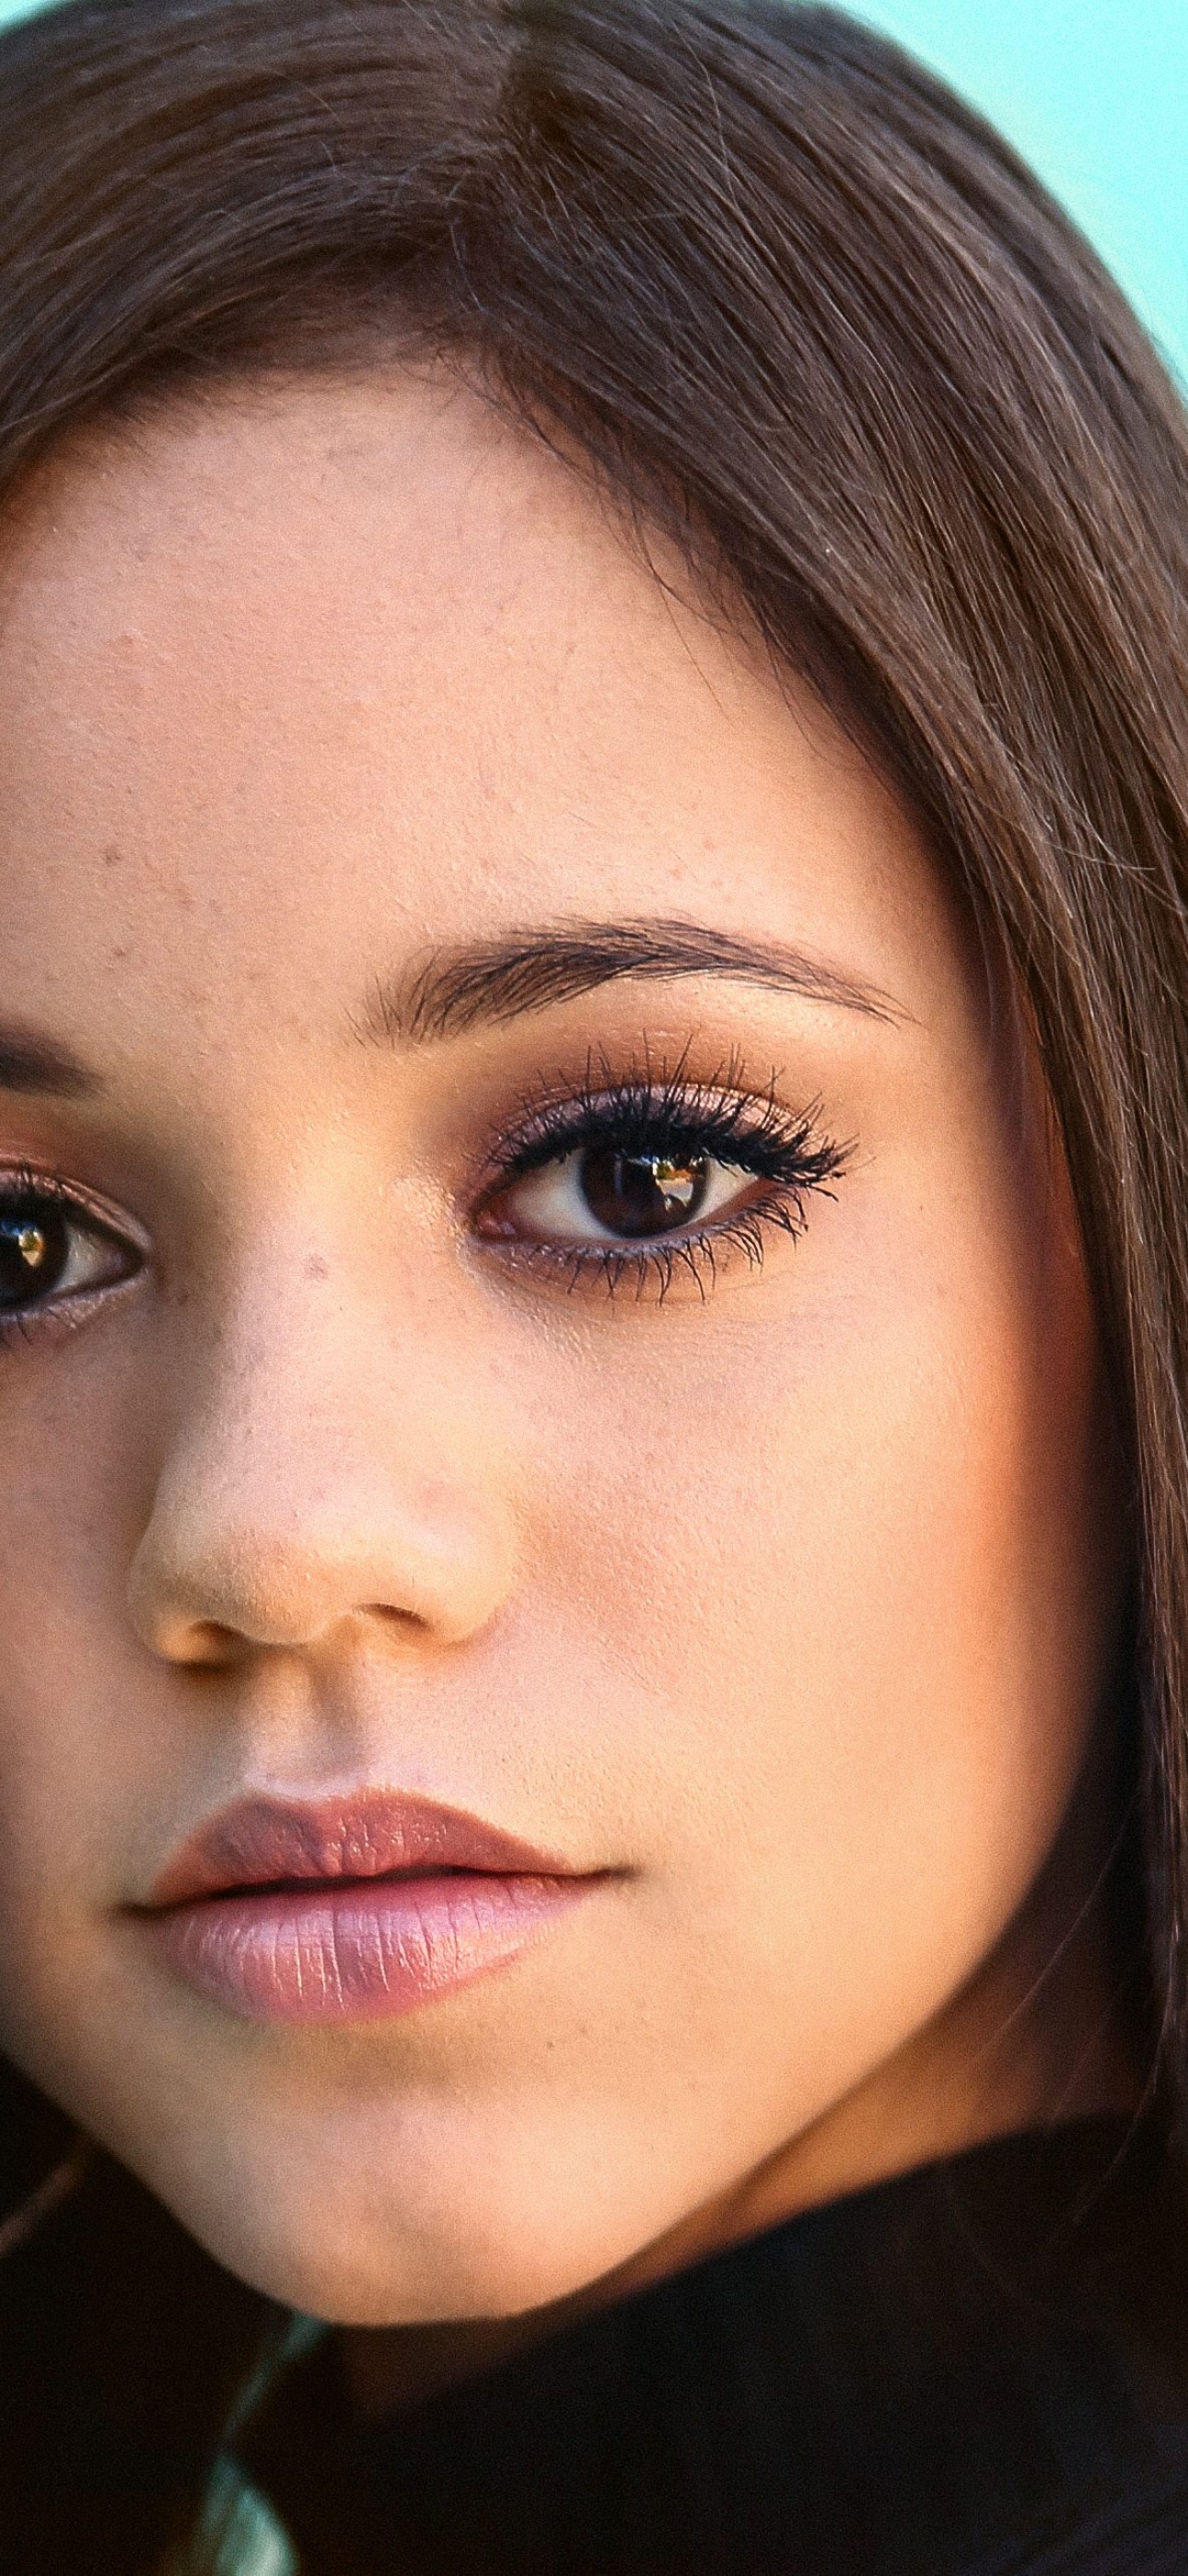 Download wallpaper 750x1334 smile of jenna ortega actress 2023 iphone 7  iphone 8 750x1334 hd background 29253